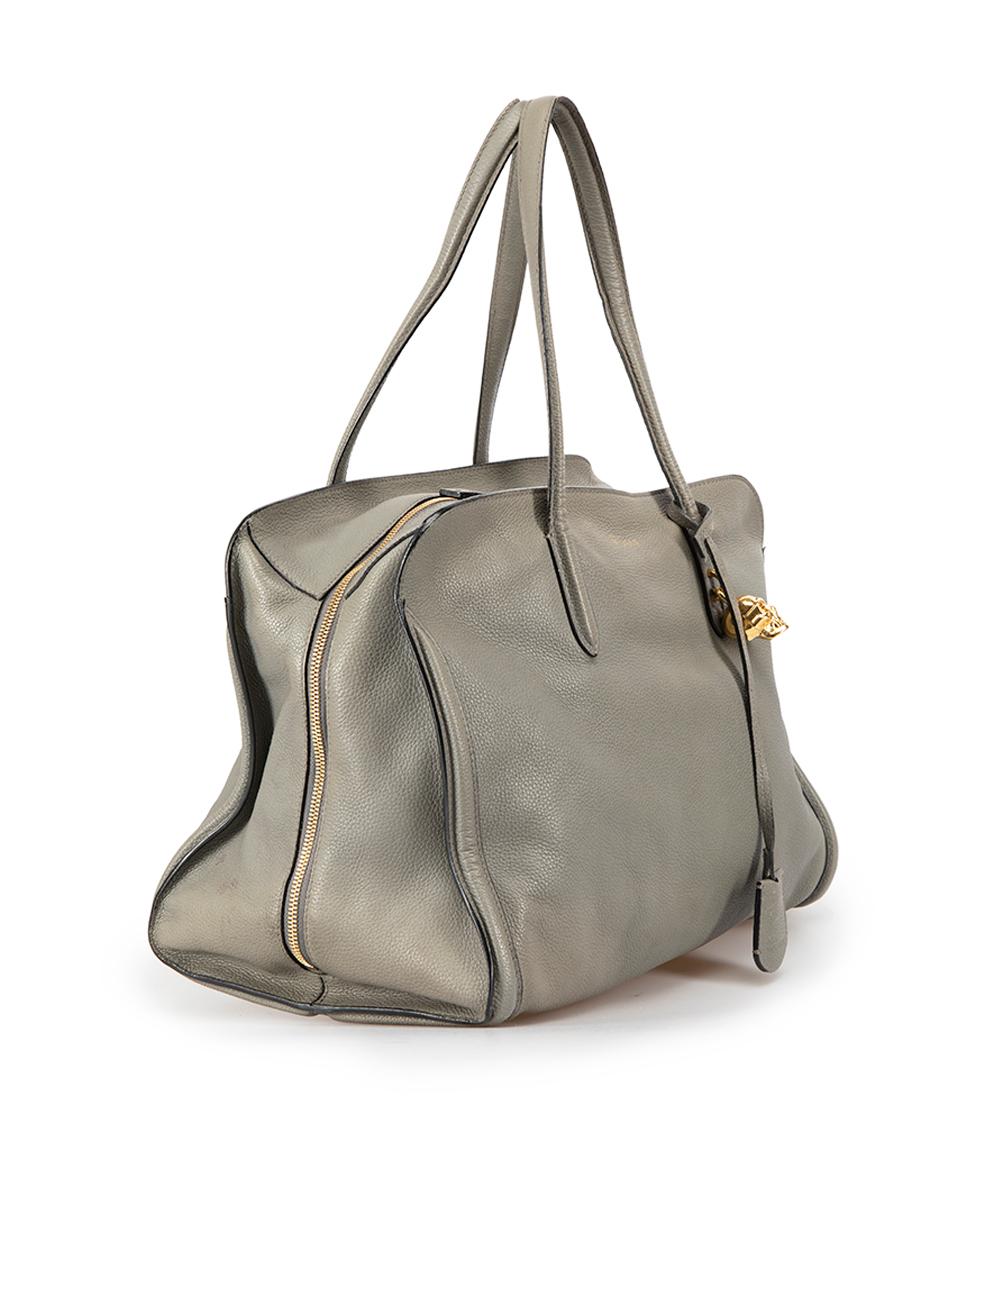 CONDITION is Very good. Minimal wear to bag is evident. Minimal wear to the front, back and base corners with scuff marks on this used Alexander McQueen designer resale item. This item comes with original dust bag.



Details


Grey

Leather

Large